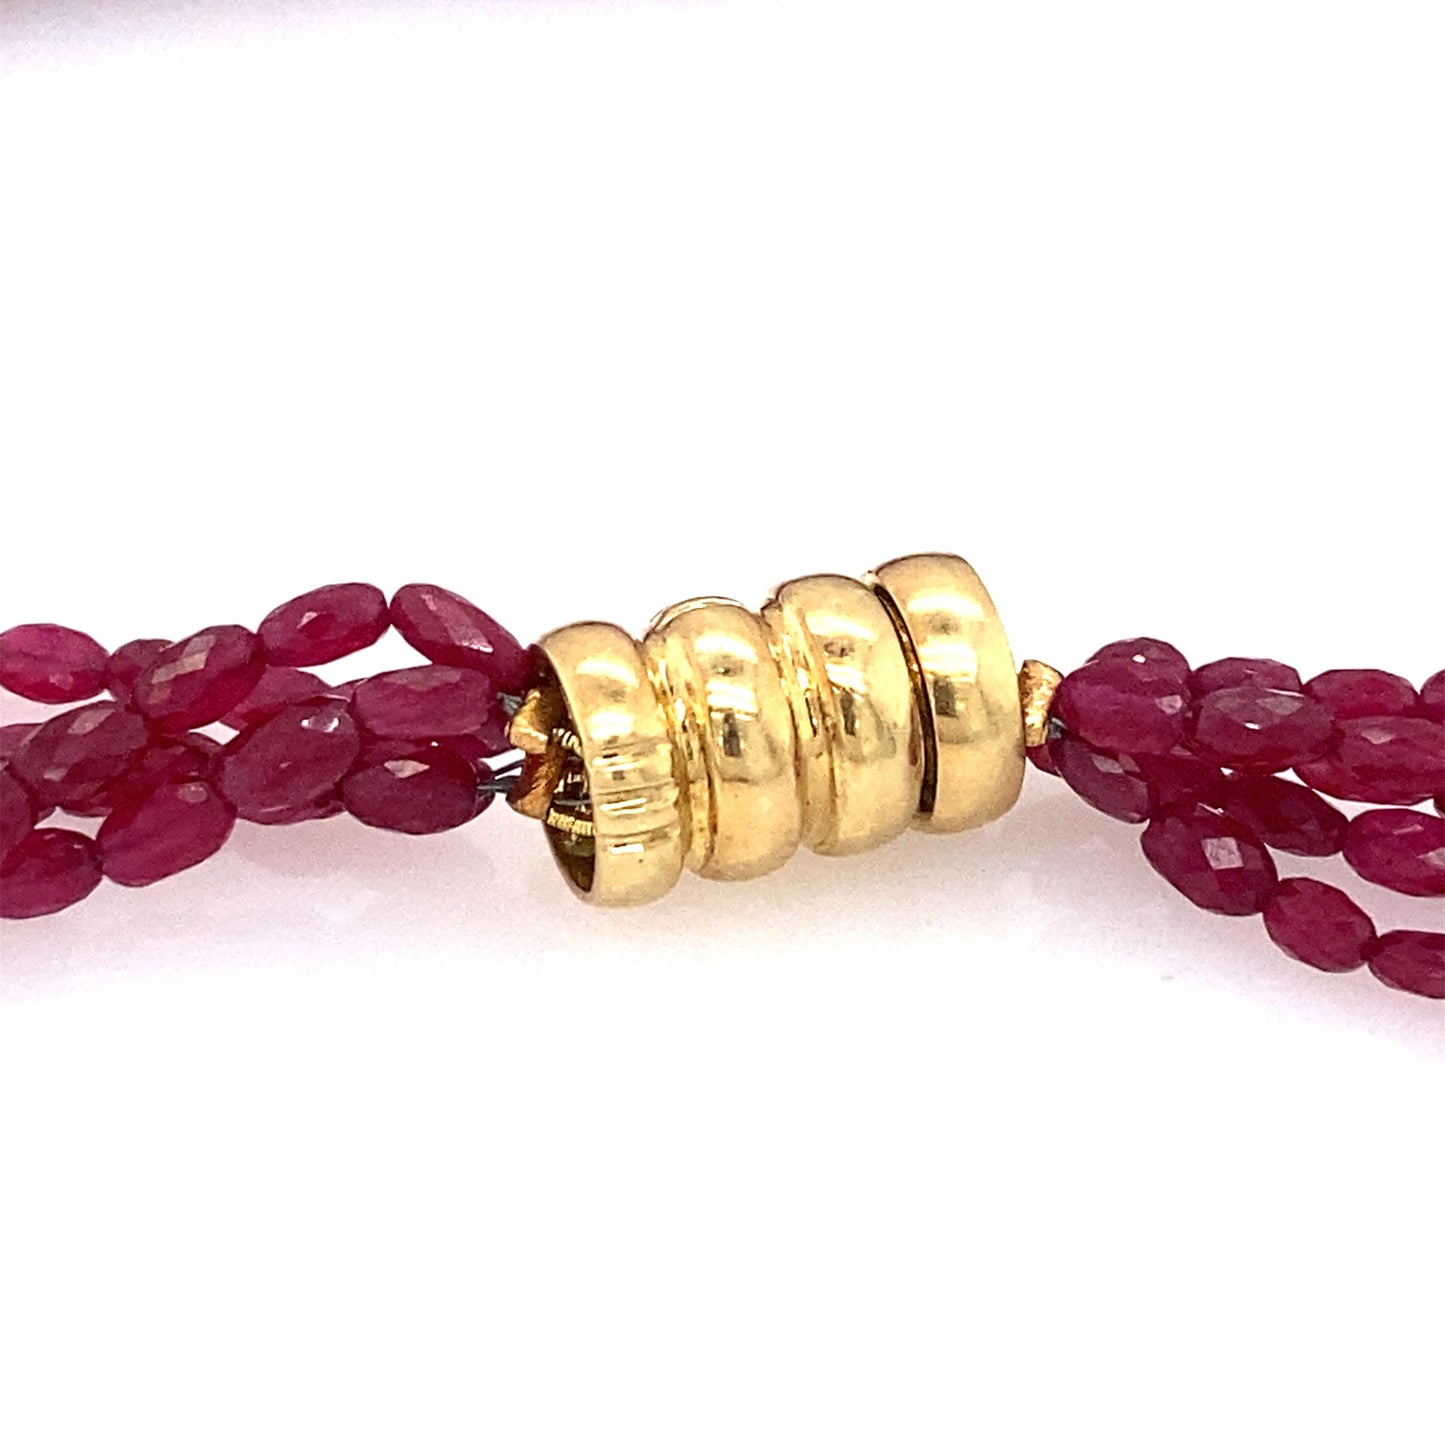 Circa 1990s Five Strand Faceted Ruby Bead Necklace with 18k Gold Magnetic Clasp